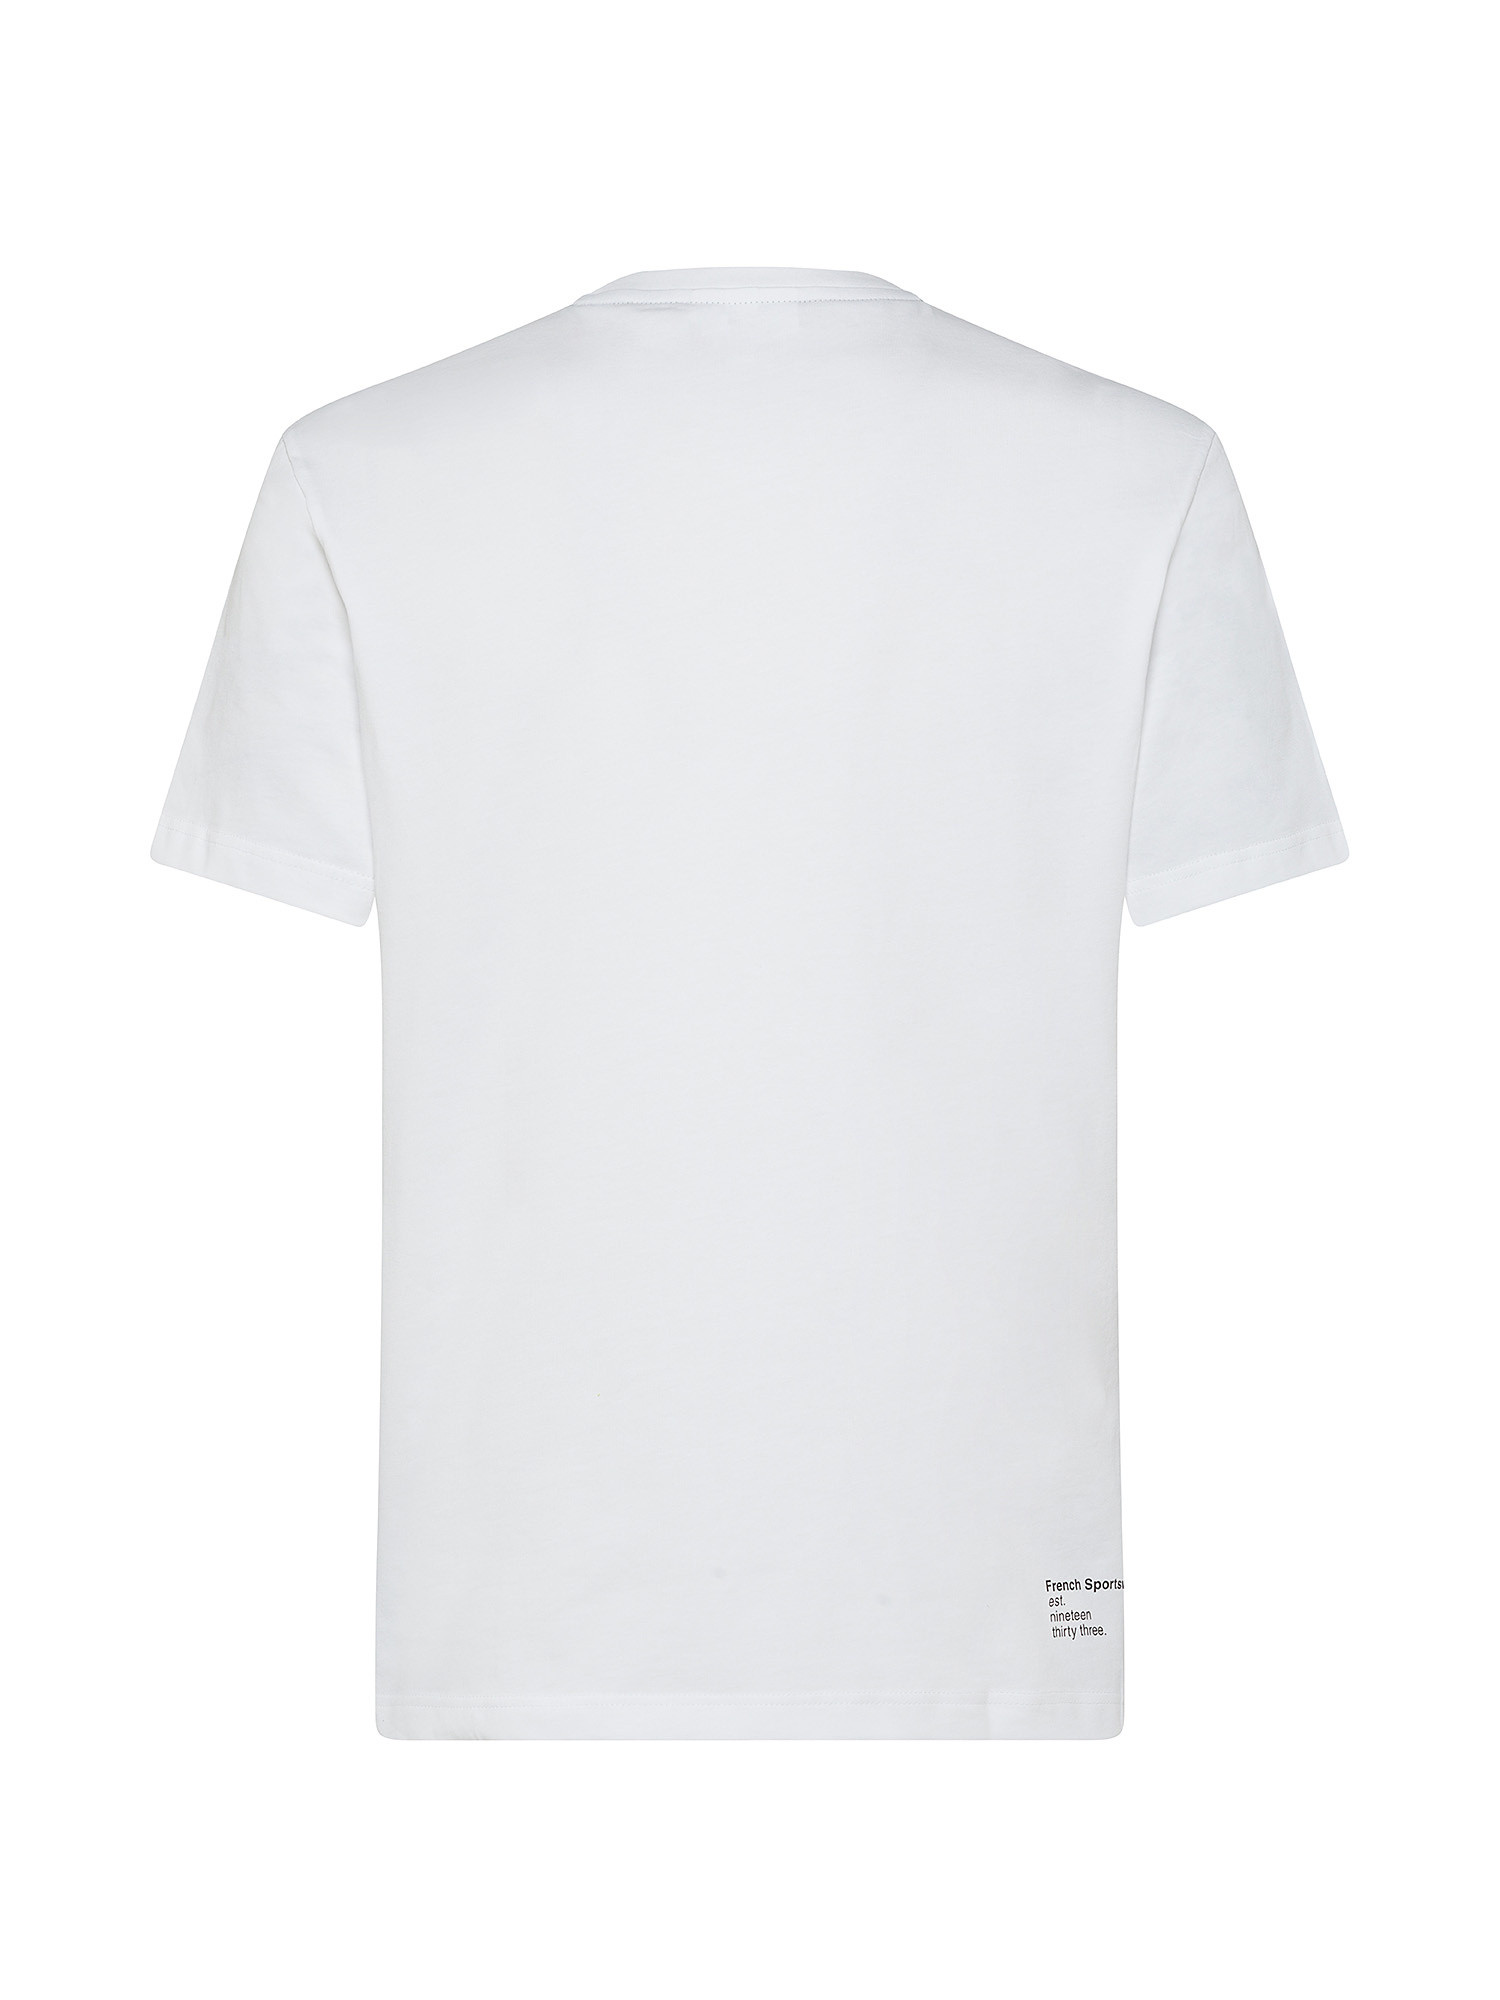 Lacoste - T-shirt in jersey di cotone, Bianco, large image number 1